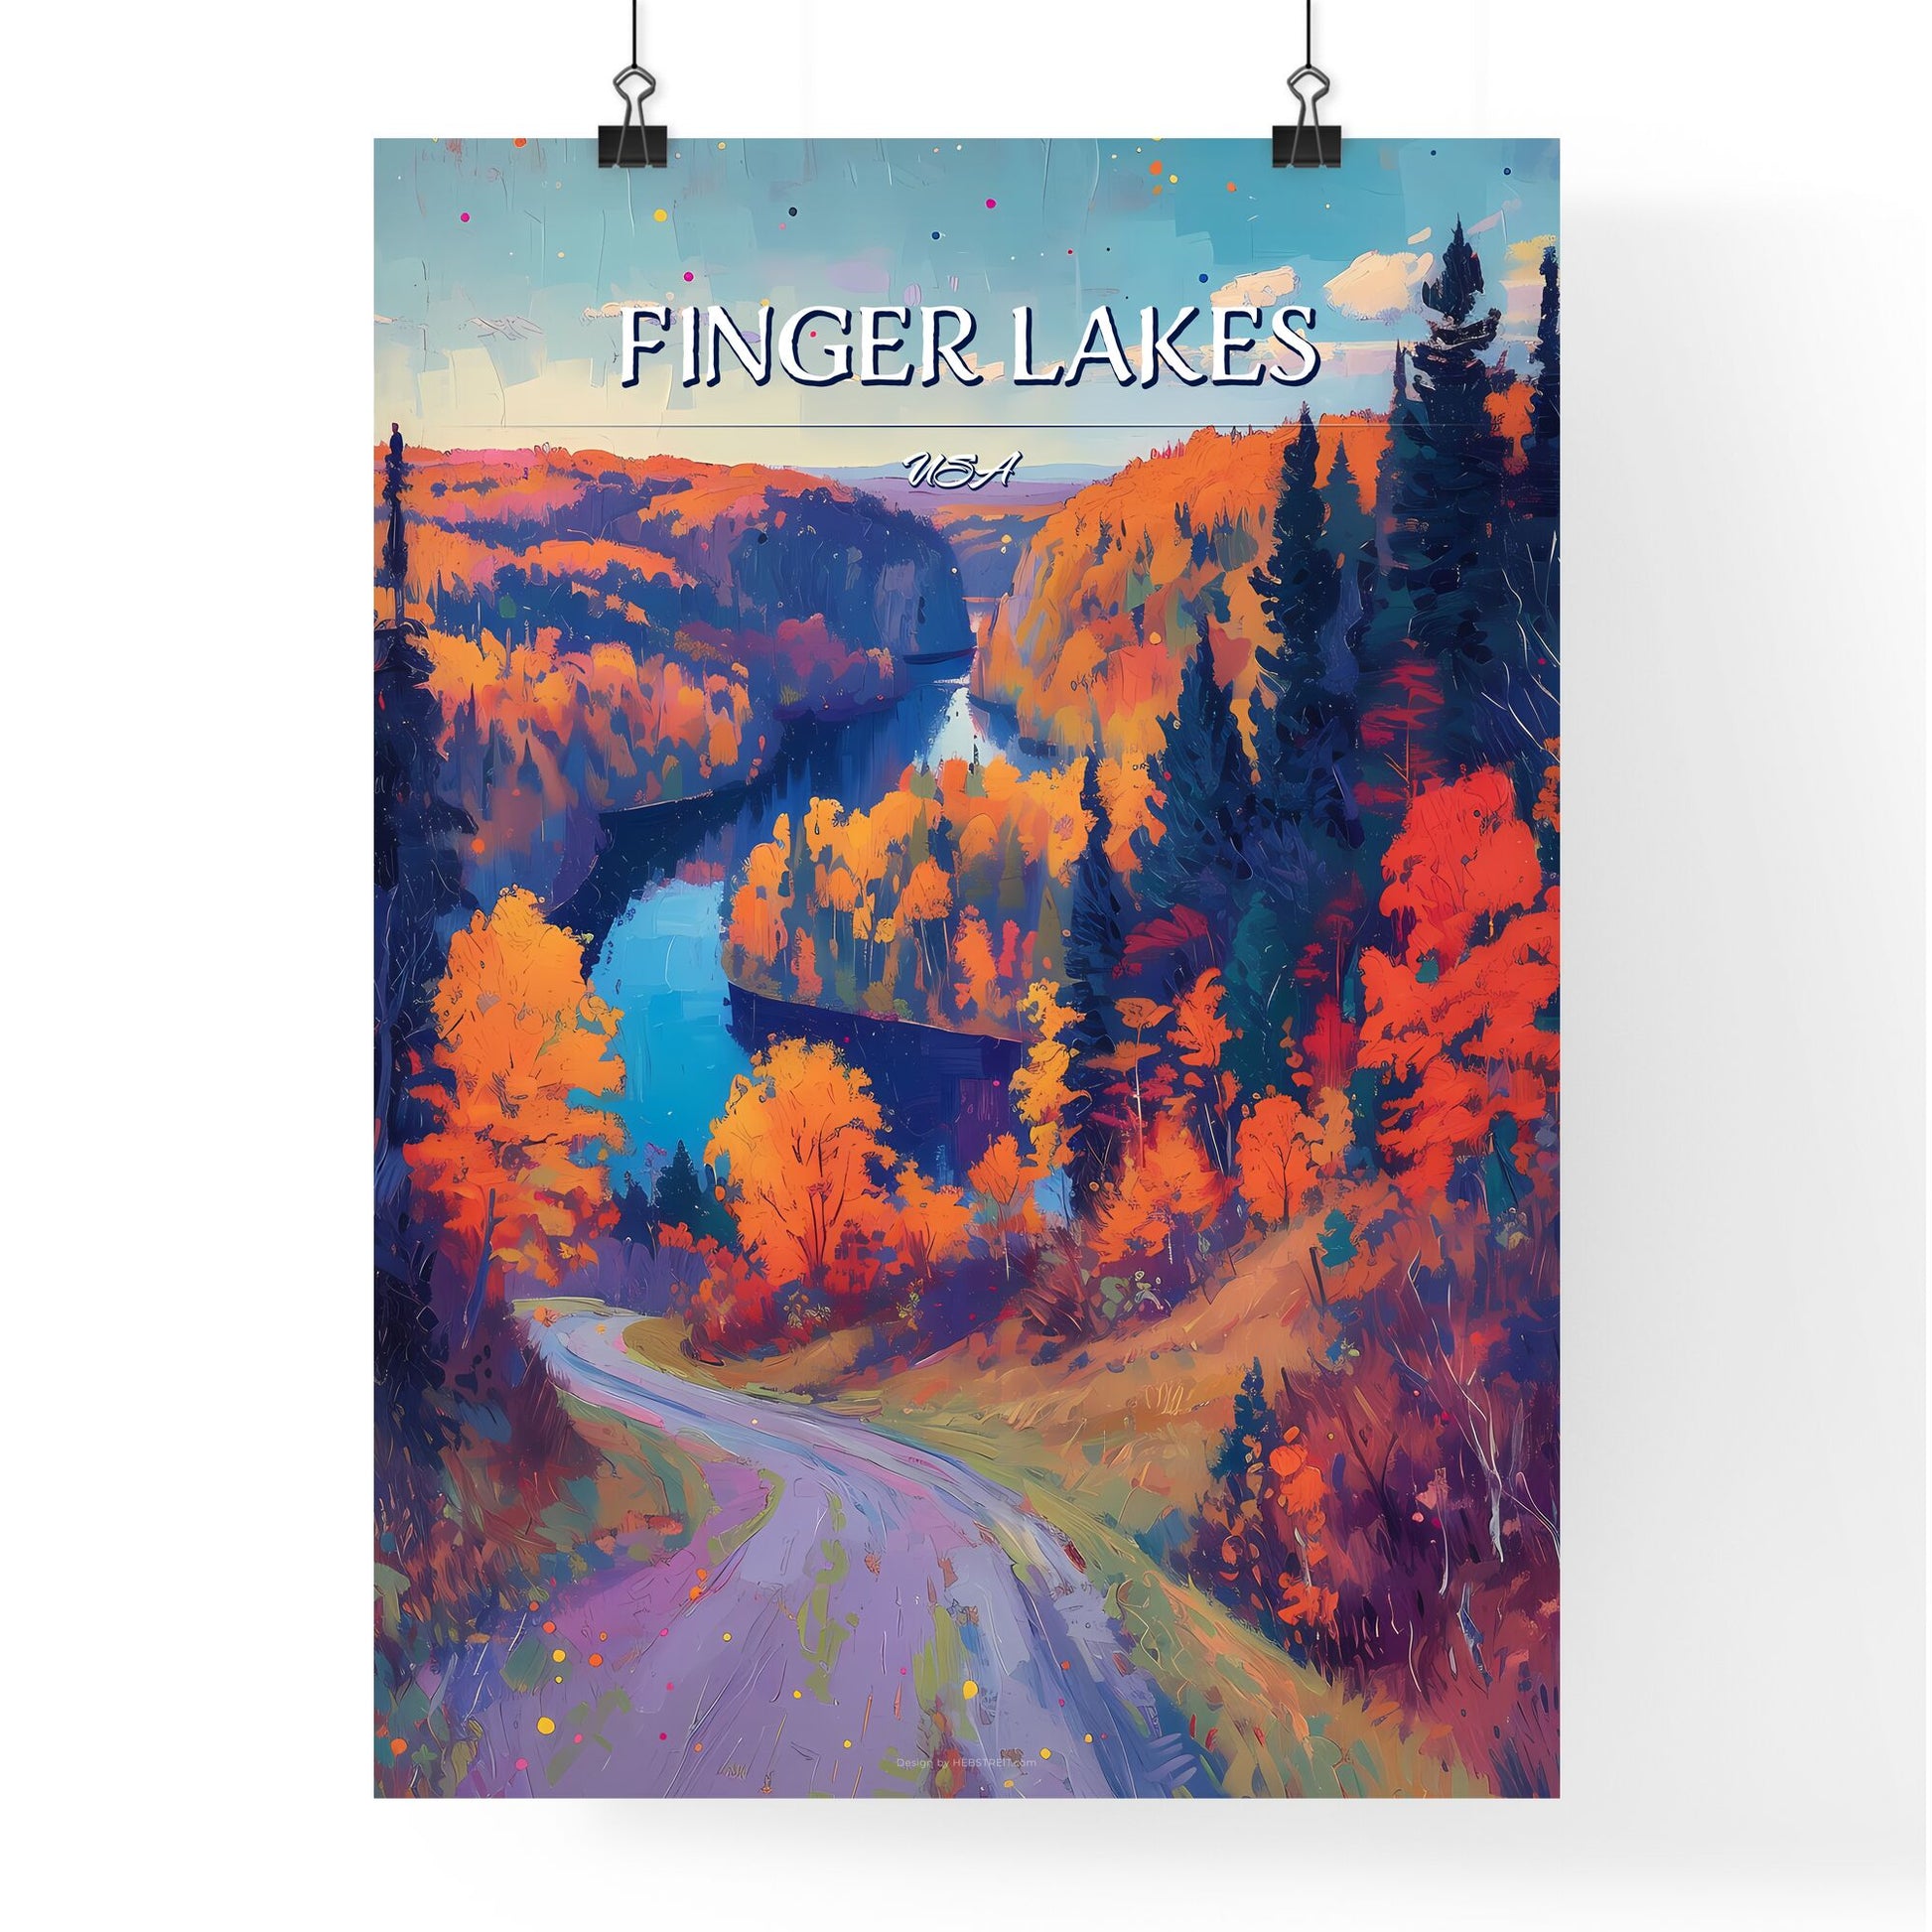 Finger Lakes, USA - Art print of a road through a forest Default Title